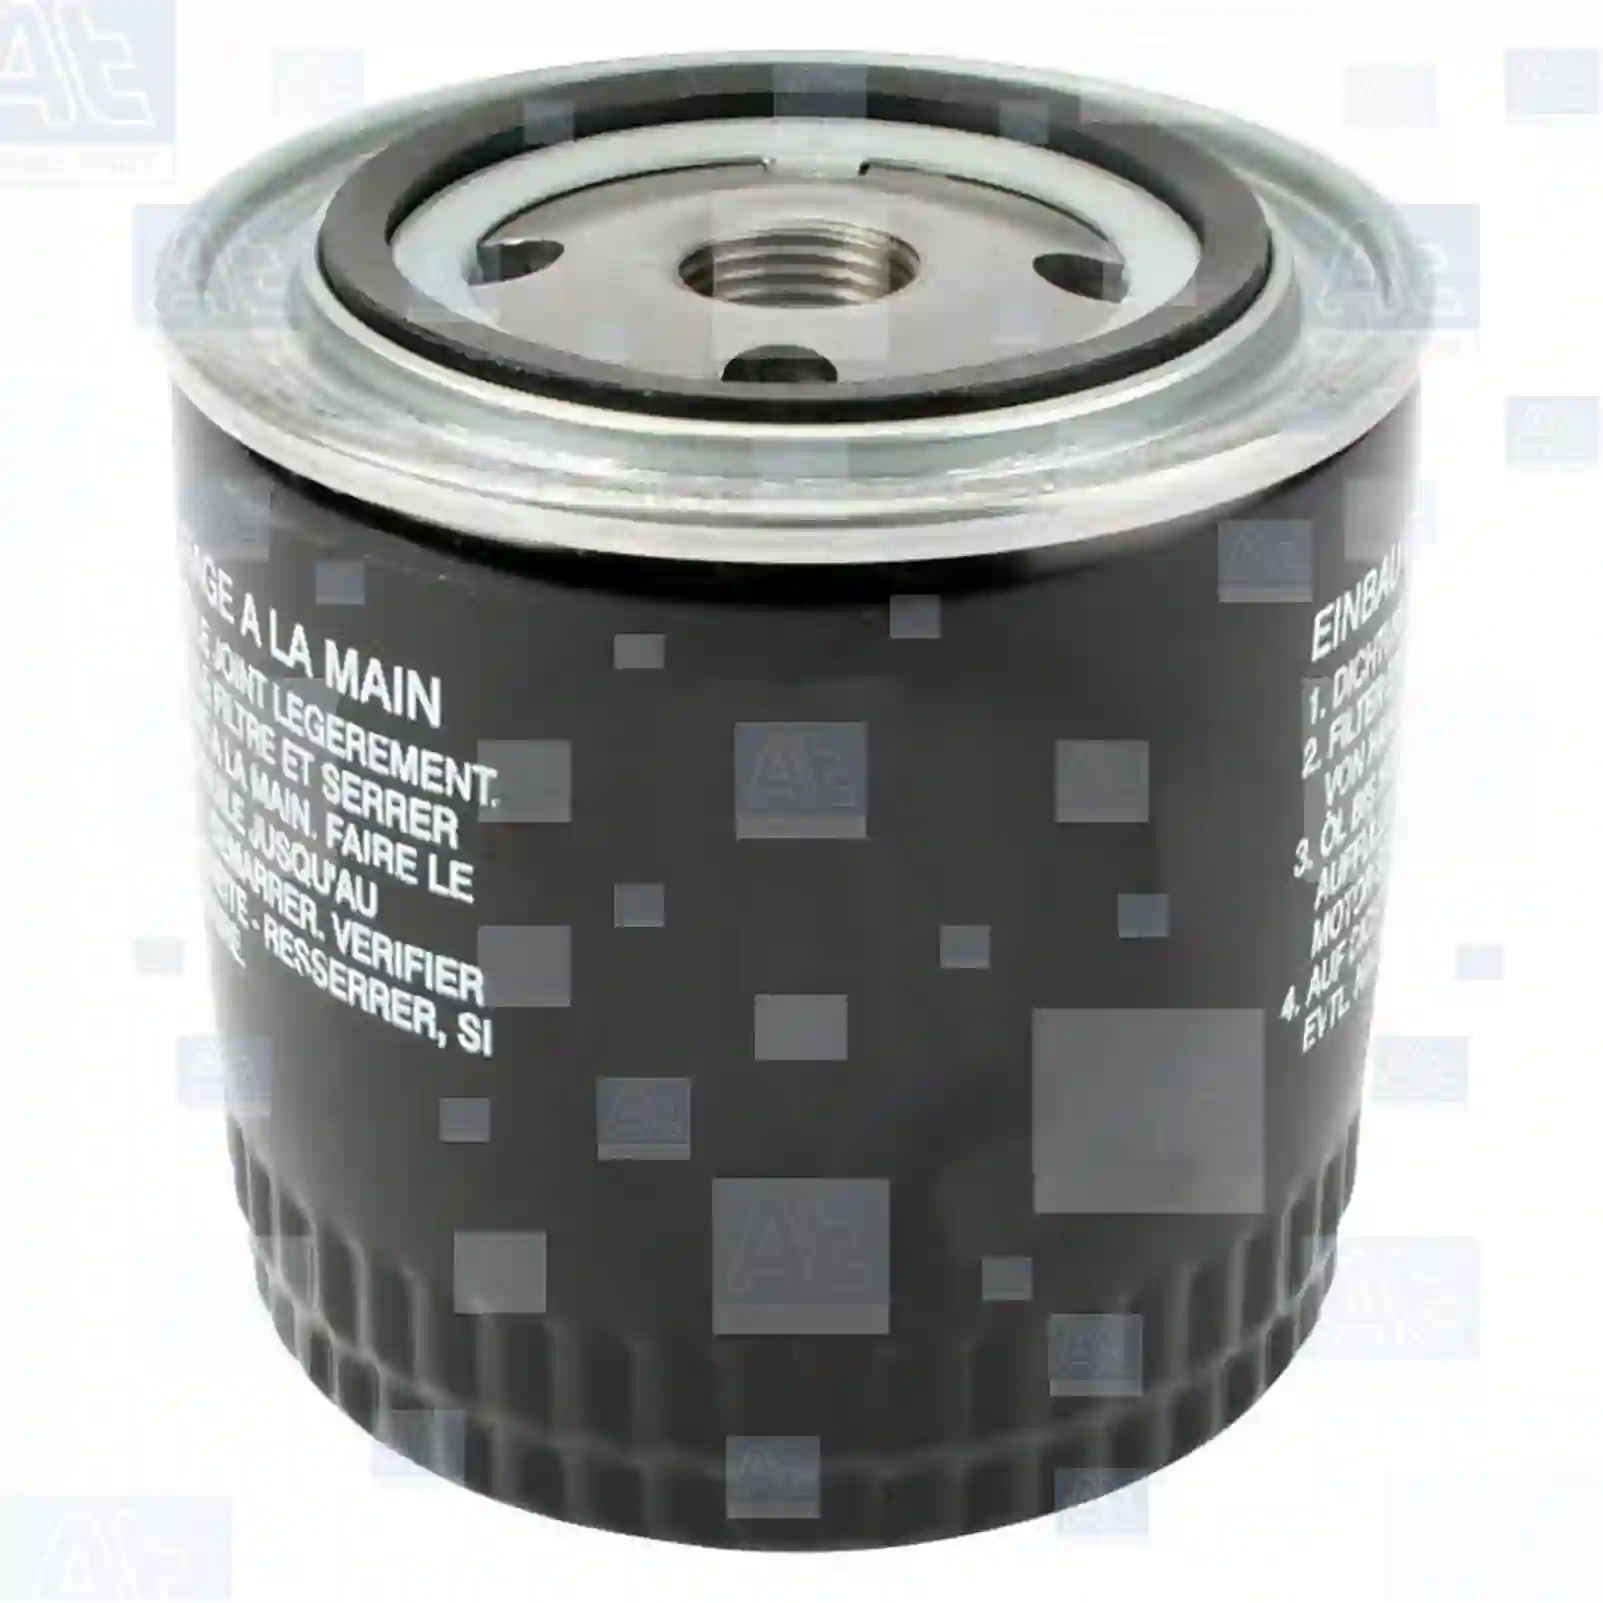 Oil filter, at no 77700223, oem no: 7825516, HB03028811, 7007007010006, 7007007021007, 00510313, 00510889, 00534372, 60507080, 224788, 7884256, 7973235, 7973429, W712, 1133277R1, 1133278R1, 3055228, 3055228R91, 3055228R93, 3055763, 3055765, 3056768, 3056768R91, 3132021, 3132021R91, 3132022, 3132022R91, 3132022R92, 3136458, 3136458R91, A46158, D062845, D62845, H334540, K200037, 377-6969, 383-0339, 9Y-4487, 9Y-4506, 2650396, 4041315, 4417559, 5041315, 5057957, 5281090, 75221405, 75221481, X3549957, 110929, 110931, 110945, 110946, 110955, 110978, 1109A0, 0006605760, 7701029278, 148459, 162097, 162997, 12G2400, 12H3274, 13H9090, 13H9104, 1500907, 1500928, ABU8536, RTC3799, 1560025010, 1560025010000, 1560087104, 1560087104000, 1560087307, 1560087307000, 1560125010, 1560187307, 1560187307000, 40111834, 401118834, 03003477, 10654074, 0141151201, 141151110, 141151201, 12153174, 7007007010006, 7007007021007, 5281090, 1620482M1, 2680600565, 11464497, 11542957, F120203310170, 04286051, 04316238, 04335580, 04343591, 04363485, 04434790, 05951685, 05951865, 05951895, 05964796, 05965796, 07075753, 07300943, 71134825, 74434825, 78511654, Y03727812, 1457512, 1482151, 1498014, 1498020, 1498021, 1508831, 1515160, 1536304, 1553370, 1556297, 1559937, 1564767, 1565486, 1641158, 464498, 5000860, 5001248, 5001926, 5002097, 5002230, 5002457, 5002530, 5002677, 5002805, 5003329, 5003331, 5003559, 5003560, 5003561, 5003932, 5003968, 5010665, 5012035, 5012040, 5013143, 5013146, 5013319, 5013957, 5014055, 5016957, 6041176, 6061629, 6063340, DNP552290, 2008219, 1003000800690, 1003000800691, 11422189823, 5577618, 7961367, 7965051, 93156669, 9975120, 9975161, 5577618, 7961367, 7965051, 0009830606, 6031840025, 6031840125, 263A107021, 62M01198110, 019468, 0229651, HH1CO-32430, 3055229R91, 3136458R91, 3136459R91, 00620751, 01903790, 02/630795, 5281090, AM31205, AM35176, AM37025, AM38441, 06501613, 06502613, 03357461, 06501613, 141151201, L24R, L63, 15056-3243-2, 16098-3129-1, 16271-3209-2, 19000-1206, 1C010-3243-0, 1C020-3243-0, HH1C0-3243-0, HH1CO-3243-0, W21ES-O1C0-0, 210101012005, 21011012005, 210110120051, 210501012005, 04434794, 05951865, 05951895, 05964796, 82342881, 82360558, 32821600, 05081070030, 06750258236, 1015511, 1041429, 1043369M91, 1620482M1, 9046817, 13052323802, 1N0114302, 60541180001, 605411880001, 605417880001, 808C01703E1, 15208-80W00, 15208-BN300, 15208-BN30A, 15208-W1106, A5208-W1103, A5208-W1106, 1220185, 122A185, 620751, 770286, 140516130, 110929, 110931, 110945, 110946, 110955, 110978, 1109A0, 0008558238, 0008558910, 0500010031, 0855823800, 5000100351, 5000789225, 5000790022, 5001846635, 6005019727, 6005019740, 6005019759, 6005019763, 7700538153, 7700553733, 7700640165, 7700640175, 7701008698, 7701029278, 7701031111, 7701349151, 7701542286, HDS900, 10803467, 10806225, 12H3274, 801779, ABU8536, 800334, 880334, 24195304, 244191401, 173171, 7496144, 7894066, 914444, 9144445, 930957, 932037, 9320375, 8312000298, 209070087, 2090787, 4060716, 418432, 5041315, 75221405, 75221581, 7910244815, 7910246815, 00120-00001, 00120-00007, 15600-05600, 15600-13050, 15600-20550, 15600-25010, 15600-25070, 15600-87104, 15600-87307, 15600-96001, 15601-20550, 15601-20571, 15601-25010, 15601-78001, 15601-87307, 15601-96001, 15601-96006, 90915-40001, 220530, 3316074, 3338201, 7007007010000, 6231459, 7413694, 7897321, 79078234, 79270542, 8614752, 021115351A, ZG01696-0008 At Spare Part | Engine, Accelerator Pedal, Camshaft, Connecting Rod, Crankcase, Crankshaft, Cylinder Head, Engine Suspension Mountings, Exhaust Manifold, Exhaust Gas Recirculation, Filter Kits, Flywheel Housing, General Overhaul Kits, Engine, Intake Manifold, Oil Cleaner, Oil Cooler, Oil Filter, Oil Pump, Oil Sump, Piston & Liner, Sensor & Switch, Timing Case, Turbocharger, Cooling System, Belt Tensioner, Coolant Filter, Coolant Pipe, Corrosion Prevention Agent, Drive, Expansion Tank, Fan, Intercooler, Monitors & Gauges, Radiator, Thermostat, V-Belt / Timing belt, Water Pump, Fuel System, Electronical Injector Unit, Feed Pump, Fuel Filter, cpl., Fuel Gauge Sender,  Fuel Line, Fuel Pump, Fuel Tank, Injection Line Kit, Injection Pump, Exhaust System, Clutch & Pedal, Gearbox, Propeller Shaft, Axles, Brake System, Hubs & Wheels, Suspension, Leaf Spring, Universal Parts / Accessories, Steering, Electrical System, Cabin Oil filter, at no 77700223, oem no: 7825516, HB03028811, 7007007010006, 7007007021007, 00510313, 00510889, 00534372, 60507080, 224788, 7884256, 7973235, 7973429, W712, 1133277R1, 1133278R1, 3055228, 3055228R91, 3055228R93, 3055763, 3055765, 3056768, 3056768R91, 3132021, 3132021R91, 3132022, 3132022R91, 3132022R92, 3136458, 3136458R91, A46158, D062845, D62845, H334540, K200037, 377-6969, 383-0339, 9Y-4487, 9Y-4506, 2650396, 4041315, 4417559, 5041315, 5057957, 5281090, 75221405, 75221481, X3549957, 110929, 110931, 110945, 110946, 110955, 110978, 1109A0, 0006605760, 7701029278, 148459, 162097, 162997, 12G2400, 12H3274, 13H9090, 13H9104, 1500907, 1500928, ABU8536, RTC3799, 1560025010, 1560025010000, 1560087104, 1560087104000, 1560087307, 1560087307000, 1560125010, 1560187307, 1560187307000, 40111834, 401118834, 03003477, 10654074, 0141151201, 141151110, 141151201, 12153174, 7007007010006, 7007007021007, 5281090, 1620482M1, 2680600565, 11464497, 11542957, F120203310170, 04286051, 04316238, 04335580, 04343591, 04363485, 04434790, 05951685, 05951865, 05951895, 05964796, 05965796, 07075753, 07300943, 71134825, 74434825, 78511654, Y03727812, 1457512, 1482151, 1498014, 1498020, 1498021, 1508831, 1515160, 1536304, 1553370, 1556297, 1559937, 1564767, 1565486, 1641158, 464498, 5000860, 5001248, 5001926, 5002097, 5002230, 5002457, 5002530, 5002677, 5002805, 5003329, 5003331, 5003559, 5003560, 5003561, 5003932, 5003968, 5010665, 5012035, 5012040, 5013143, 5013146, 5013319, 5013957, 5014055, 5016957, 6041176, 6061629, 6063340, DNP552290, 2008219, 1003000800690, 1003000800691, 11422189823, 5577618, 7961367, 7965051, 93156669, 9975120, 9975161, 5577618, 7961367, 7965051, 0009830606, 6031840025, 6031840125, 263A107021, 62M01198110, 019468, 0229651, HH1CO-32430, 3055229R91, 3136458R91, 3136459R91, 00620751, 01903790, 02/630795, 5281090, AM31205, AM35176, AM37025, AM38441, 06501613, 06502613, 03357461, 06501613, 141151201, L24R, L63, 15056-3243-2, 16098-3129-1, 16271-3209-2, 19000-1206, 1C010-3243-0, 1C020-3243-0, HH1C0-3243-0, HH1CO-3243-0, W21ES-O1C0-0, 210101012005, 21011012005, 210110120051, 210501012005, 04434794, 05951865, 05951895, 05964796, 82342881, 82360558, 32821600, 05081070030, 06750258236, 1015511, 1041429, 1043369M91, 1620482M1, 9046817, 13052323802, 1N0114302, 60541180001, 605411880001, 605417880001, 808C01703E1, 15208-80W00, 15208-BN300, 15208-BN30A, 15208-W1106, A5208-W1103, A5208-W1106, 1220185, 122A185, 620751, 770286, 140516130, 110929, 110931, 110945, 110946, 110955, 110978, 1109A0, 0008558238, 0008558910, 0500010031, 0855823800, 5000100351, 5000789225, 5000790022, 5001846635, 6005019727, 6005019740, 6005019759, 6005019763, 7700538153, 7700553733, 7700640165, 7700640175, 7701008698, 7701029278, 7701031111, 7701349151, 7701542286, HDS900, 10803467, 10806225, 12H3274, 801779, ABU8536, 800334, 880334, 24195304, 244191401, 173171, 7496144, 7894066, 914444, 9144445, 930957, 932037, 9320375, 8312000298, 209070087, 2090787, 4060716, 418432, 5041315, 75221405, 75221581, 7910244815, 7910246815, 00120-00001, 00120-00007, 15600-05600, 15600-13050, 15600-20550, 15600-25010, 15600-25070, 15600-87104, 15600-87307, 15600-96001, 15601-20550, 15601-20571, 15601-25010, 15601-78001, 15601-87307, 15601-96001, 15601-96006, 90915-40001, 220530, 3316074, 3338201, 7007007010000, 6231459, 7413694, 7897321, 79078234, 79270542, 8614752, 021115351A, ZG01696-0008 At Spare Part | Engine, Accelerator Pedal, Camshaft, Connecting Rod, Crankcase, Crankshaft, Cylinder Head, Engine Suspension Mountings, Exhaust Manifold, Exhaust Gas Recirculation, Filter Kits, Flywheel Housing, General Overhaul Kits, Engine, Intake Manifold, Oil Cleaner, Oil Cooler, Oil Filter, Oil Pump, Oil Sump, Piston & Liner, Sensor & Switch, Timing Case, Turbocharger, Cooling System, Belt Tensioner, Coolant Filter, Coolant Pipe, Corrosion Prevention Agent, Drive, Expansion Tank, Fan, Intercooler, Monitors & Gauges, Radiator, Thermostat, V-Belt / Timing belt, Water Pump, Fuel System, Electronical Injector Unit, Feed Pump, Fuel Filter, cpl., Fuel Gauge Sender,  Fuel Line, Fuel Pump, Fuel Tank, Injection Line Kit, Injection Pump, Exhaust System, Clutch & Pedal, Gearbox, Propeller Shaft, Axles, Brake System, Hubs & Wheels, Suspension, Leaf Spring, Universal Parts / Accessories, Steering, Electrical System, Cabin